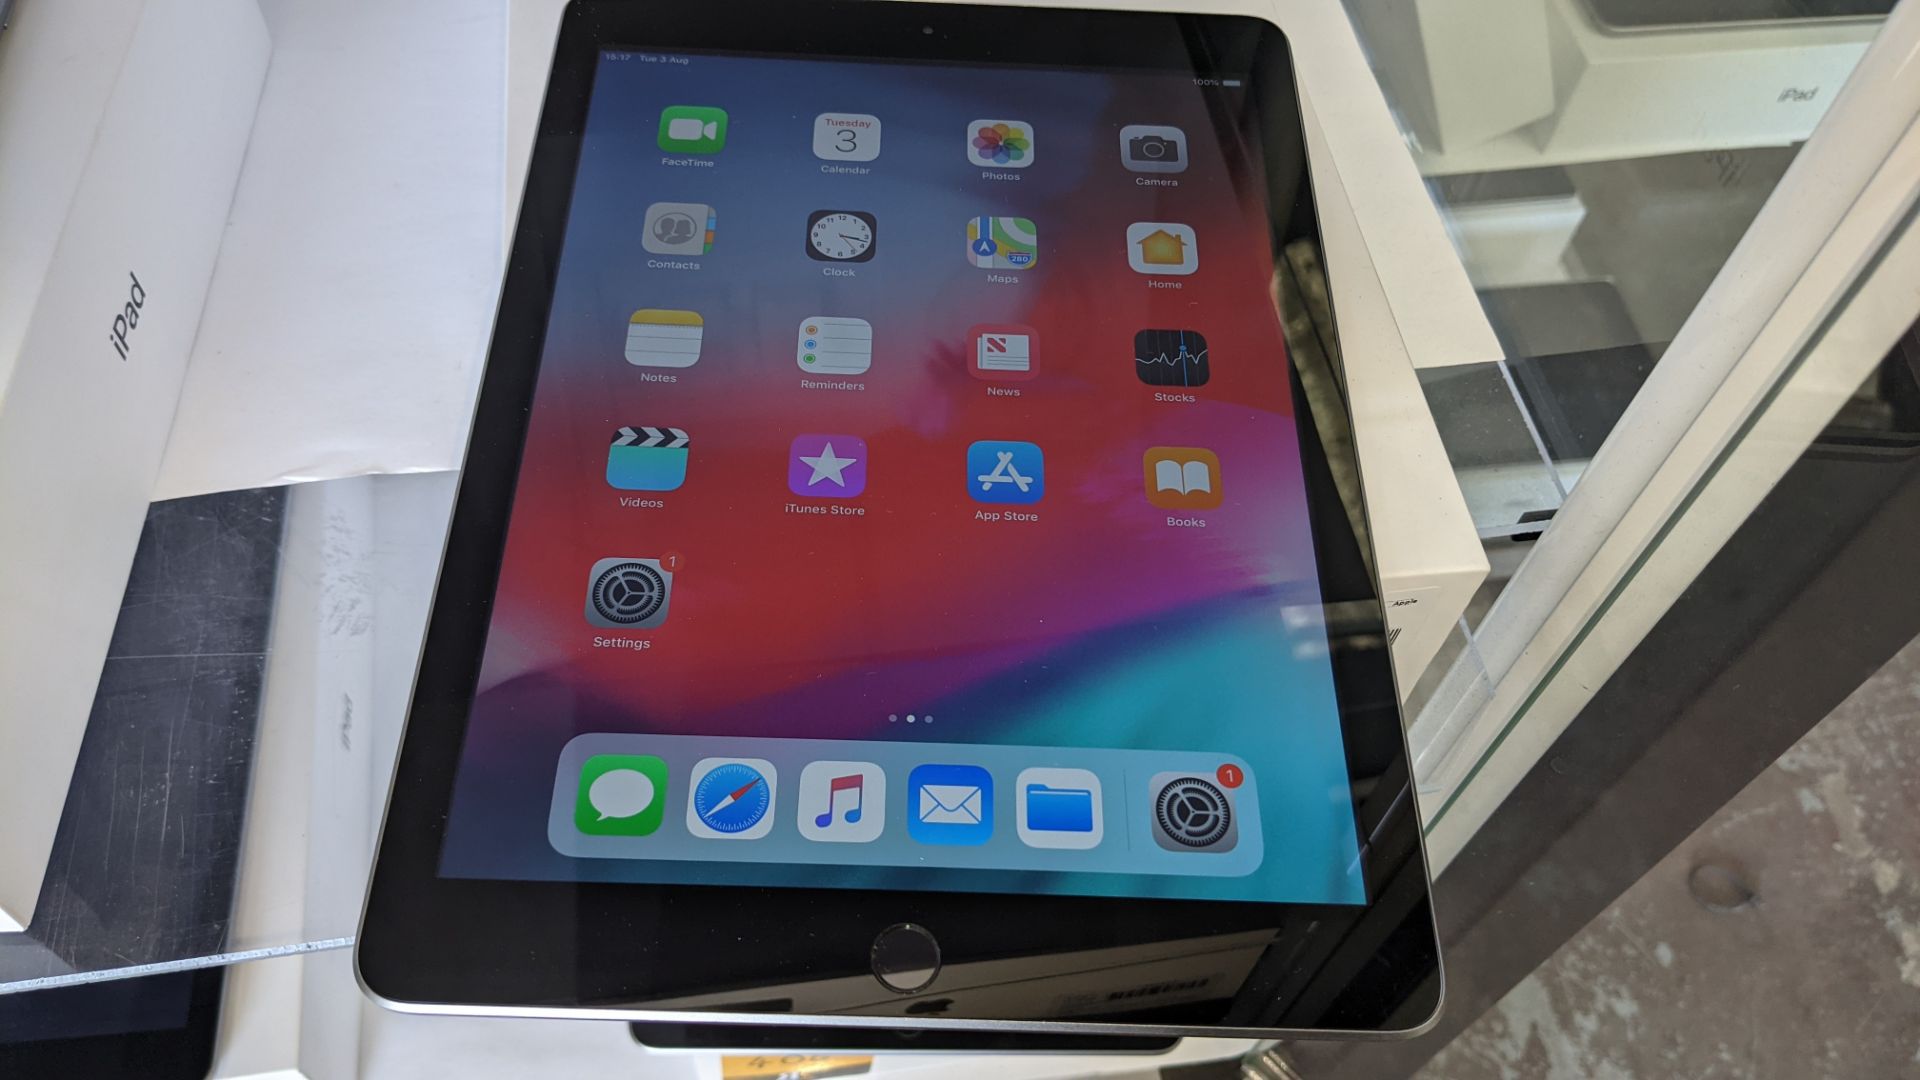 Apple iPad (space grey) 5th generation 32Gb Wi-Fi 9.7" Retina screen. Product code A1822. Apple A9 - Image 4 of 10